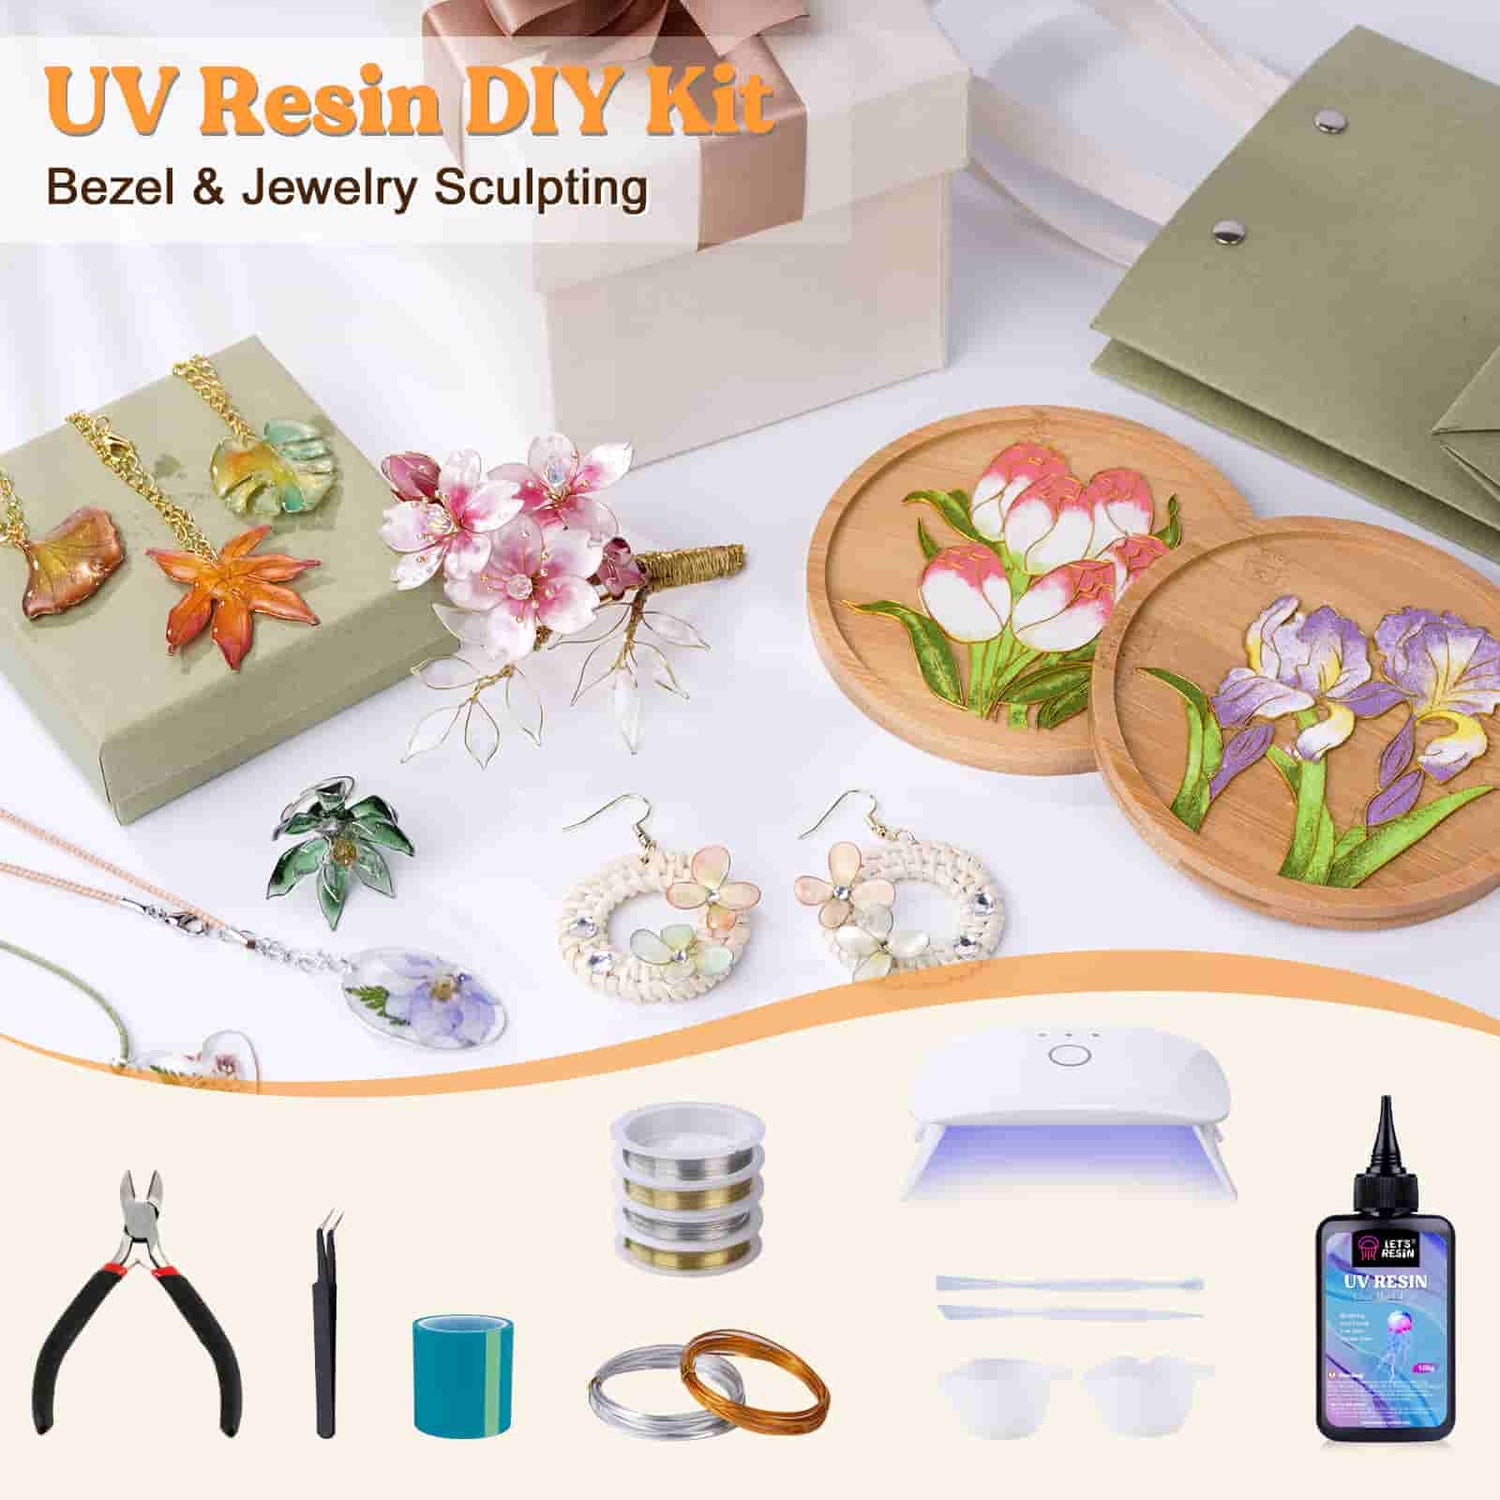 Let's Resin UV Resin Kit with Copper & Flat Aluminum Jewelry Wires